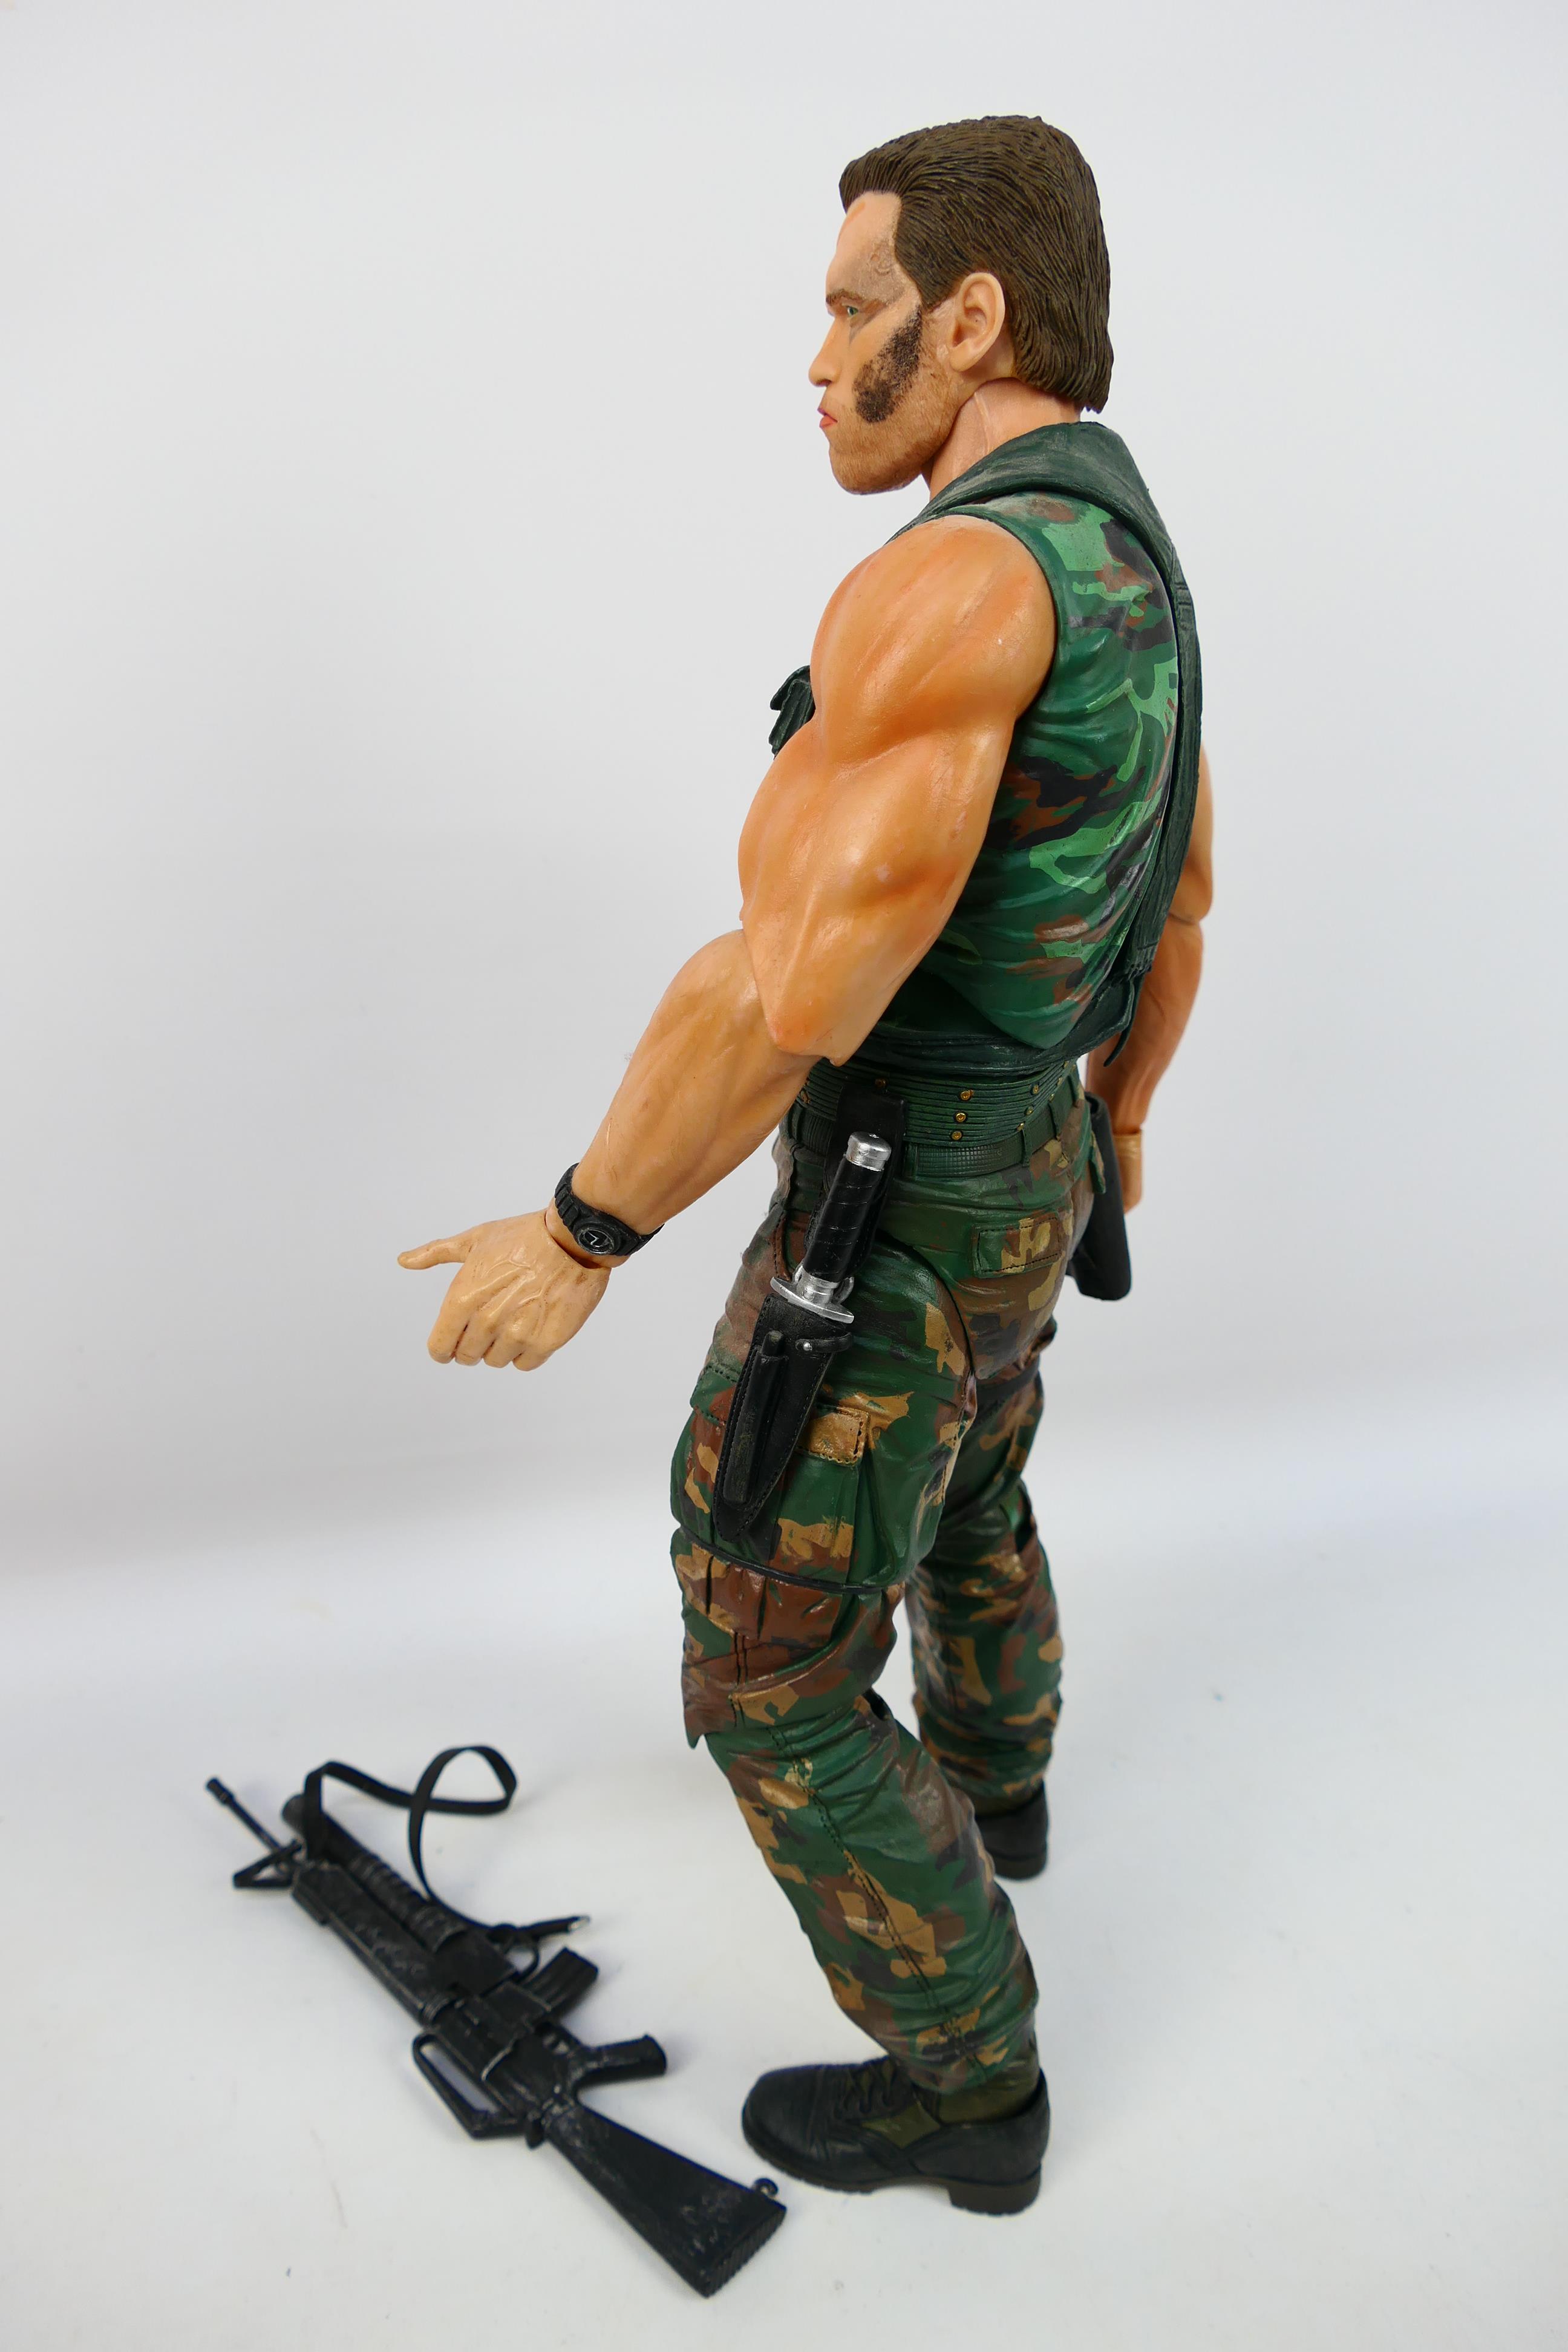 NECA - A 1:4 scale Dutch Action Figure (2013) based of the 1987 Predator film. - Image 8 of 8